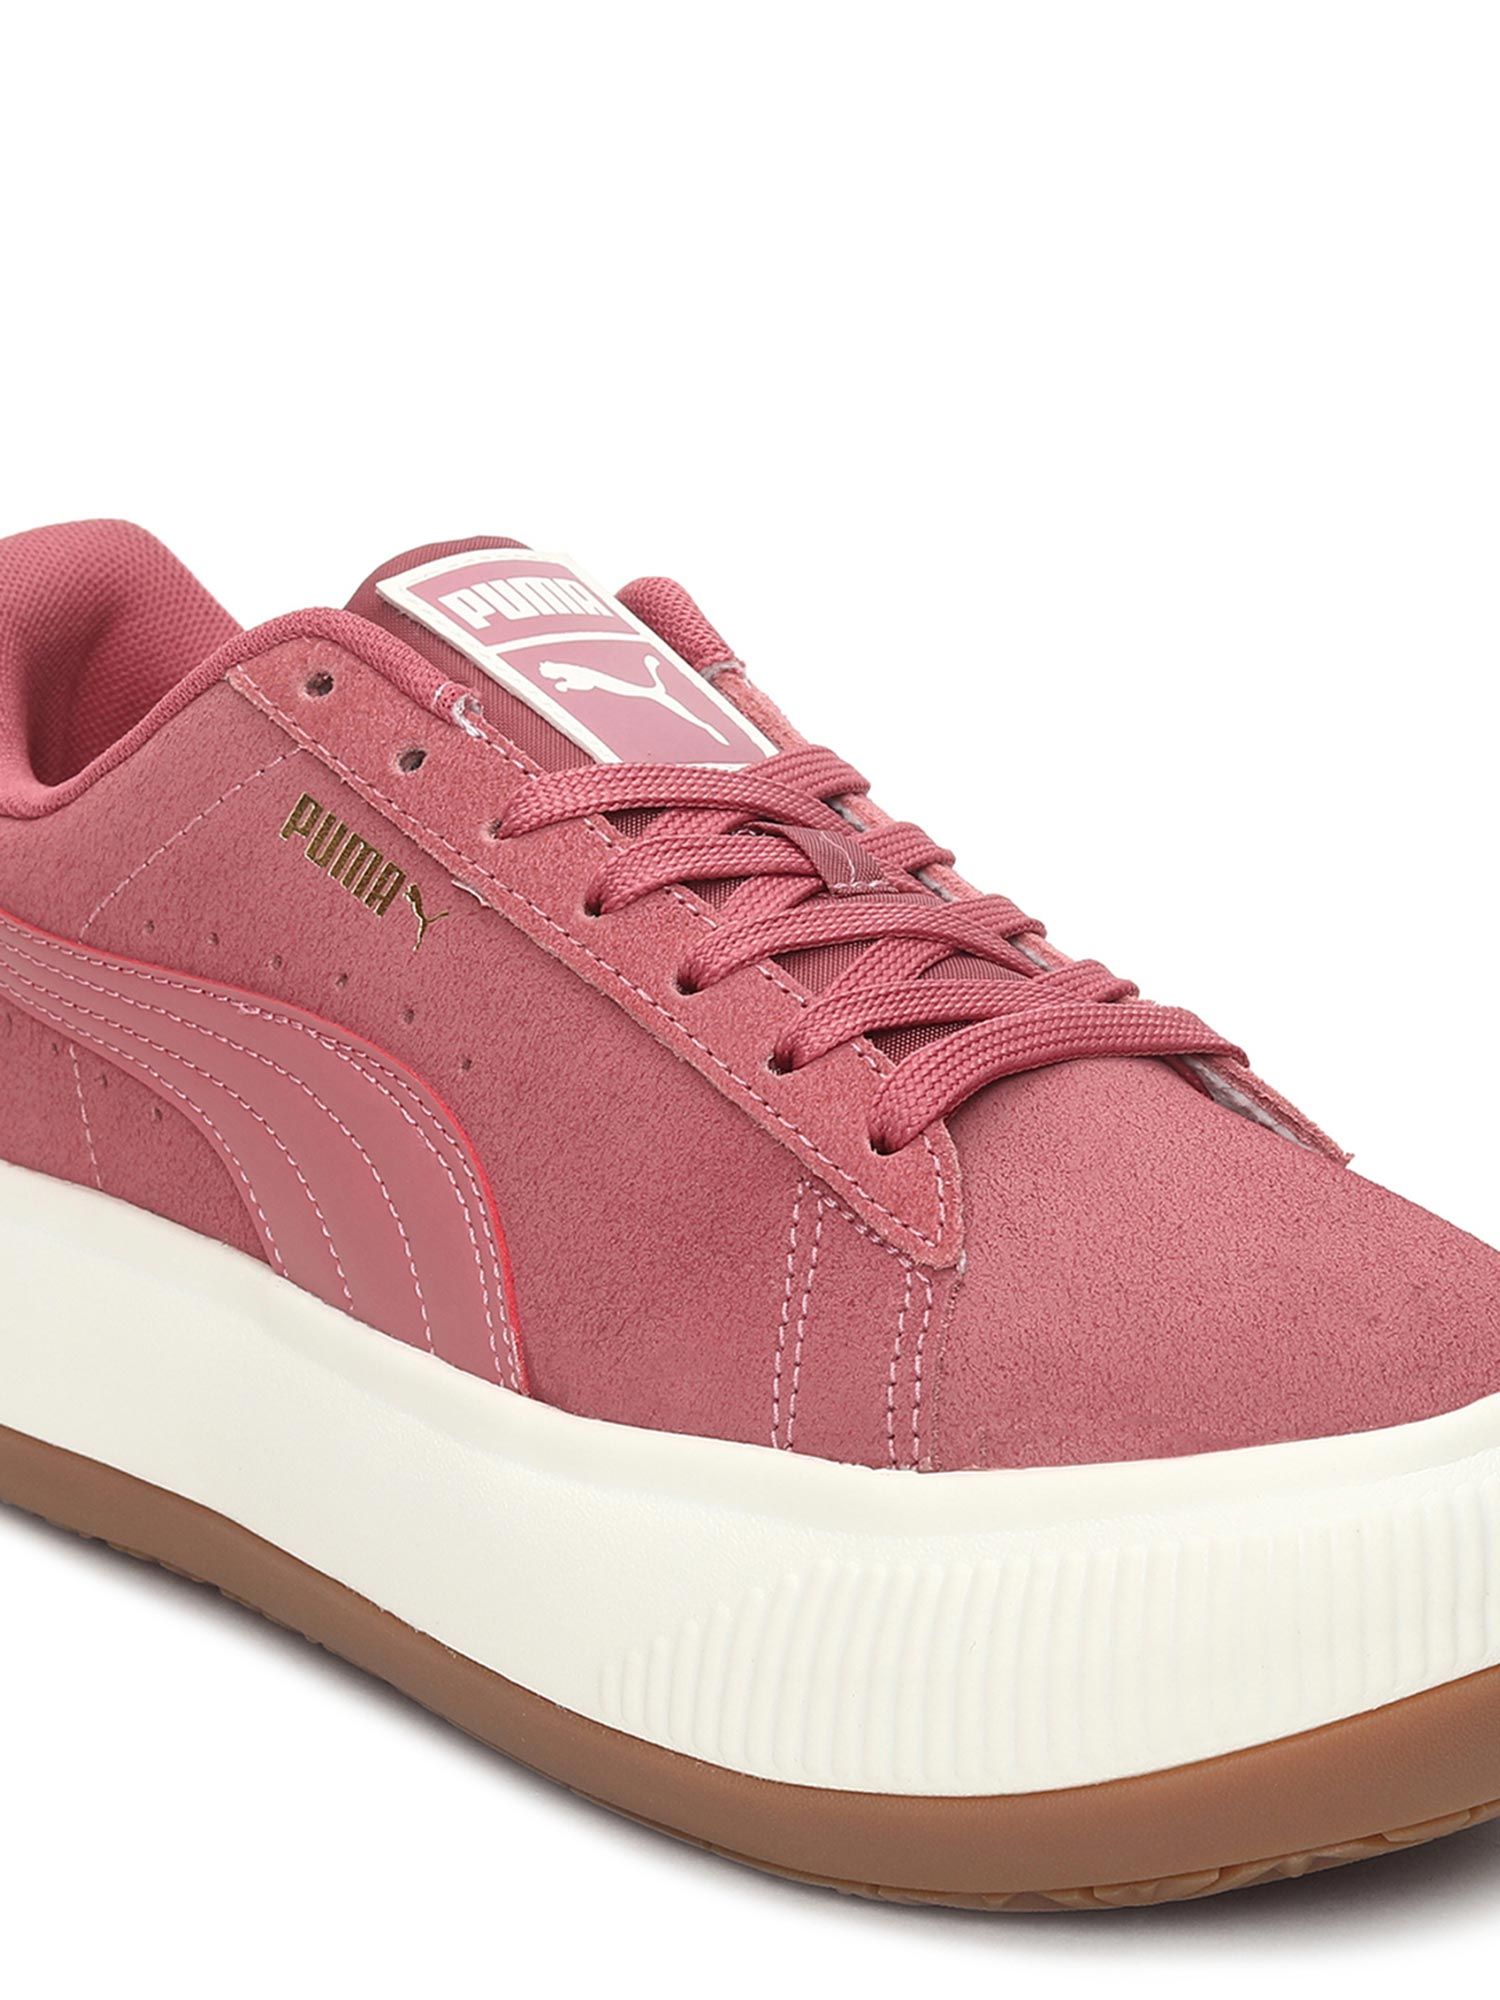 Puma Suede Women's Size 10 Shoes Pink Classic Casual Low Top Trainer  Sneakers | eBay